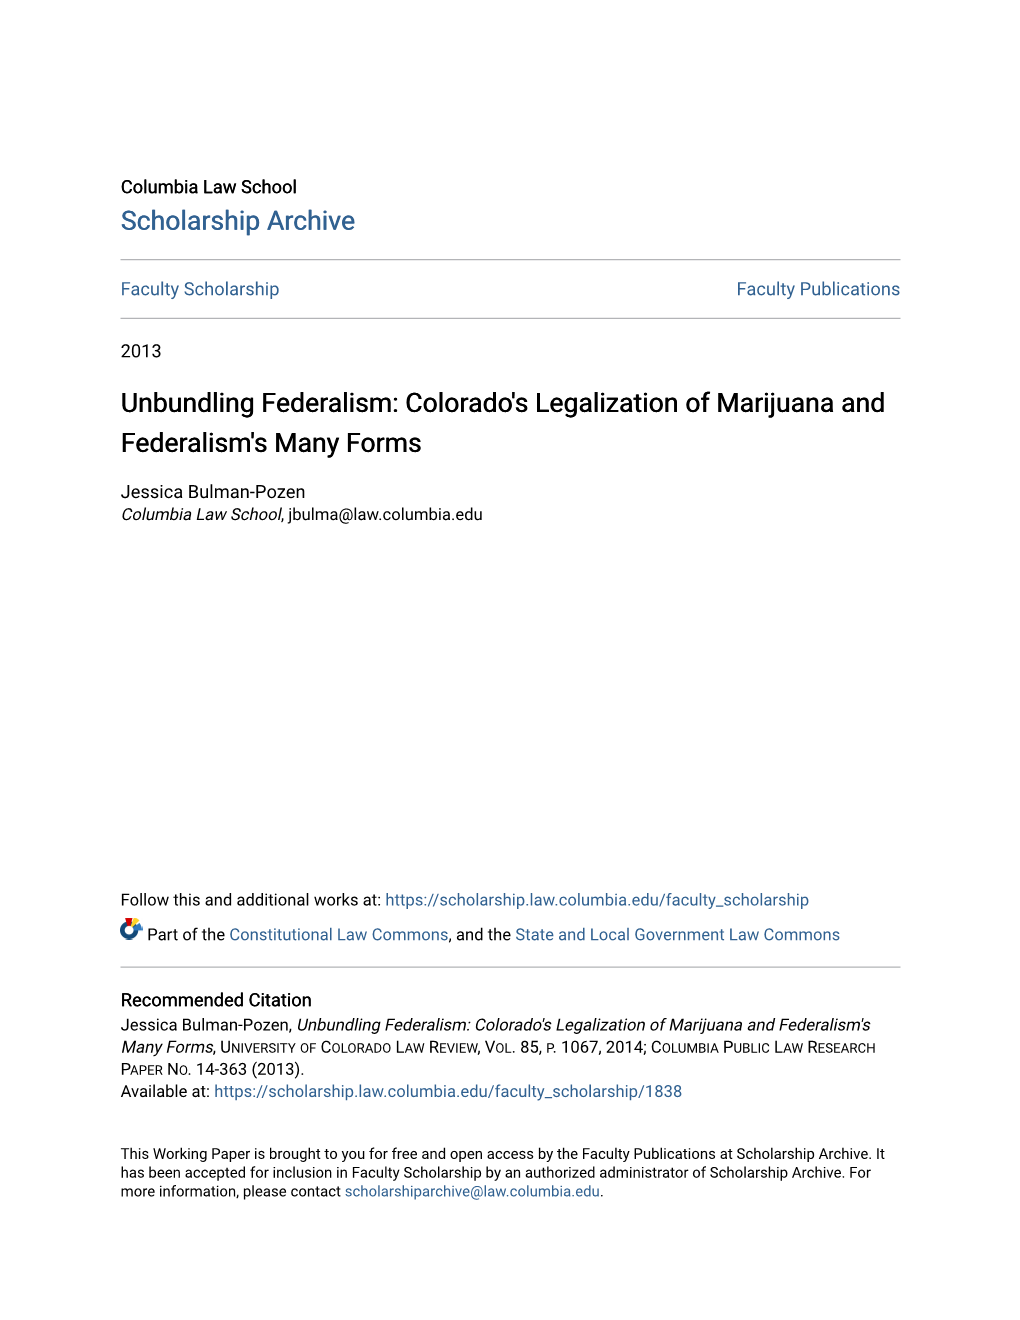 Colorado's Legalization of Marijuana and Federalism's Many Forms